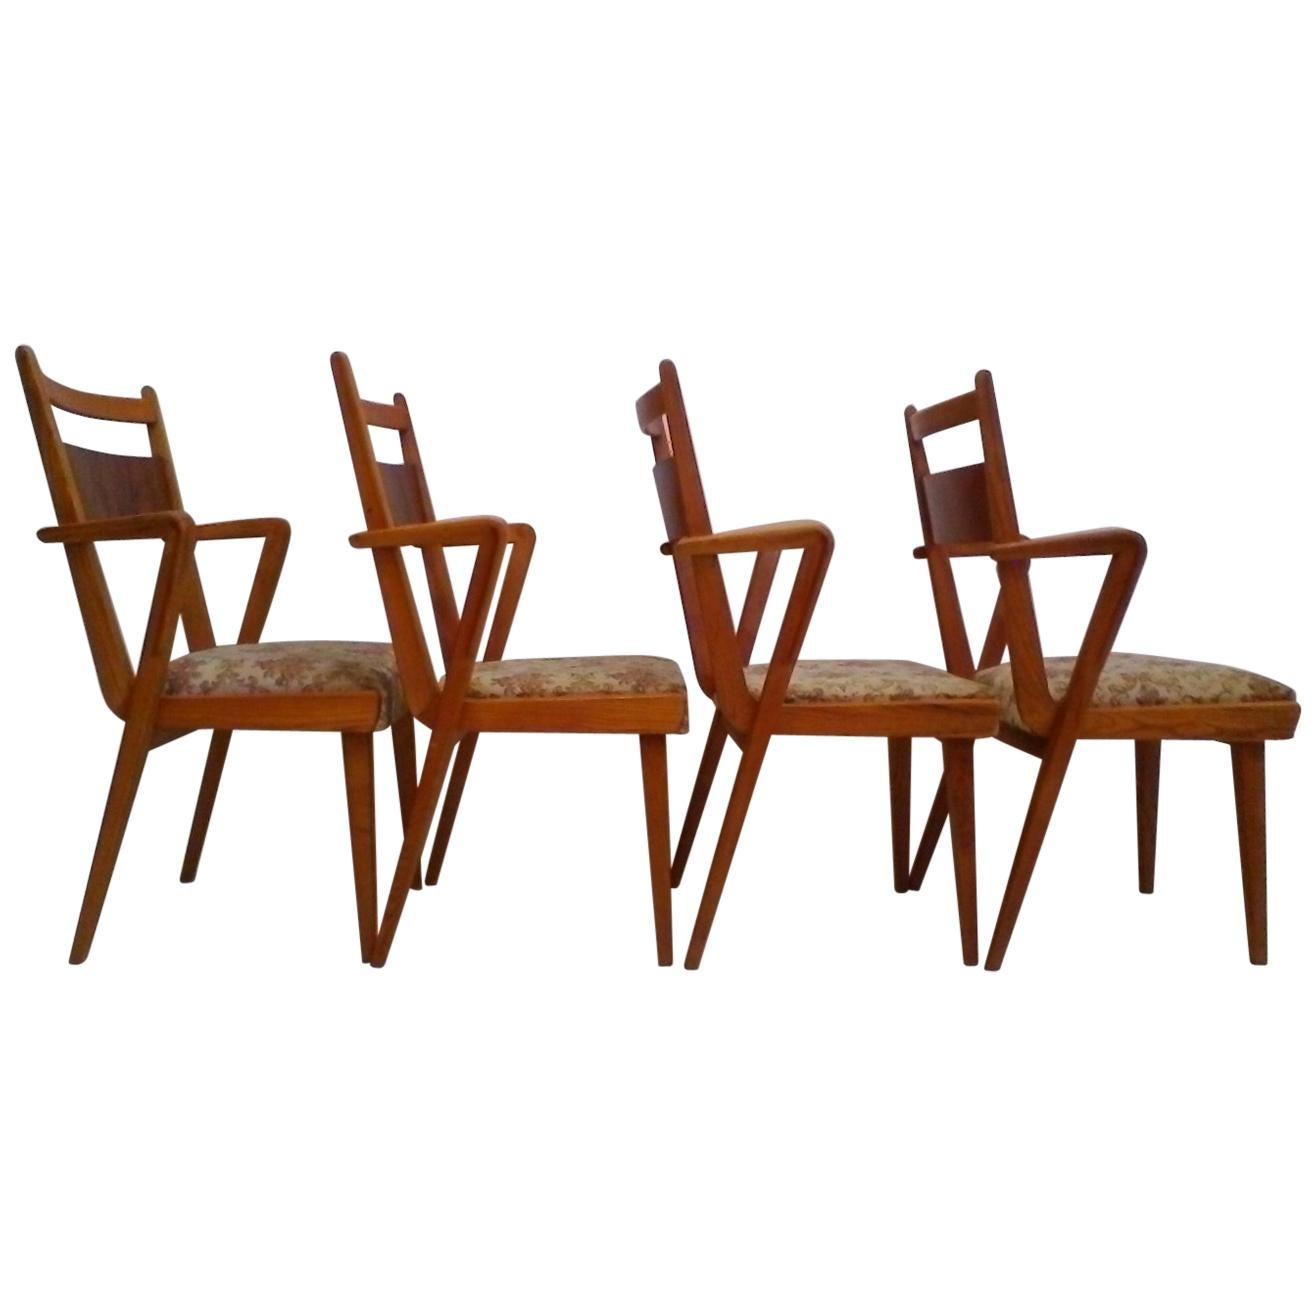 Set of Four Wooden Chairs JI-350 with New Upholstery, 1965 For Sale